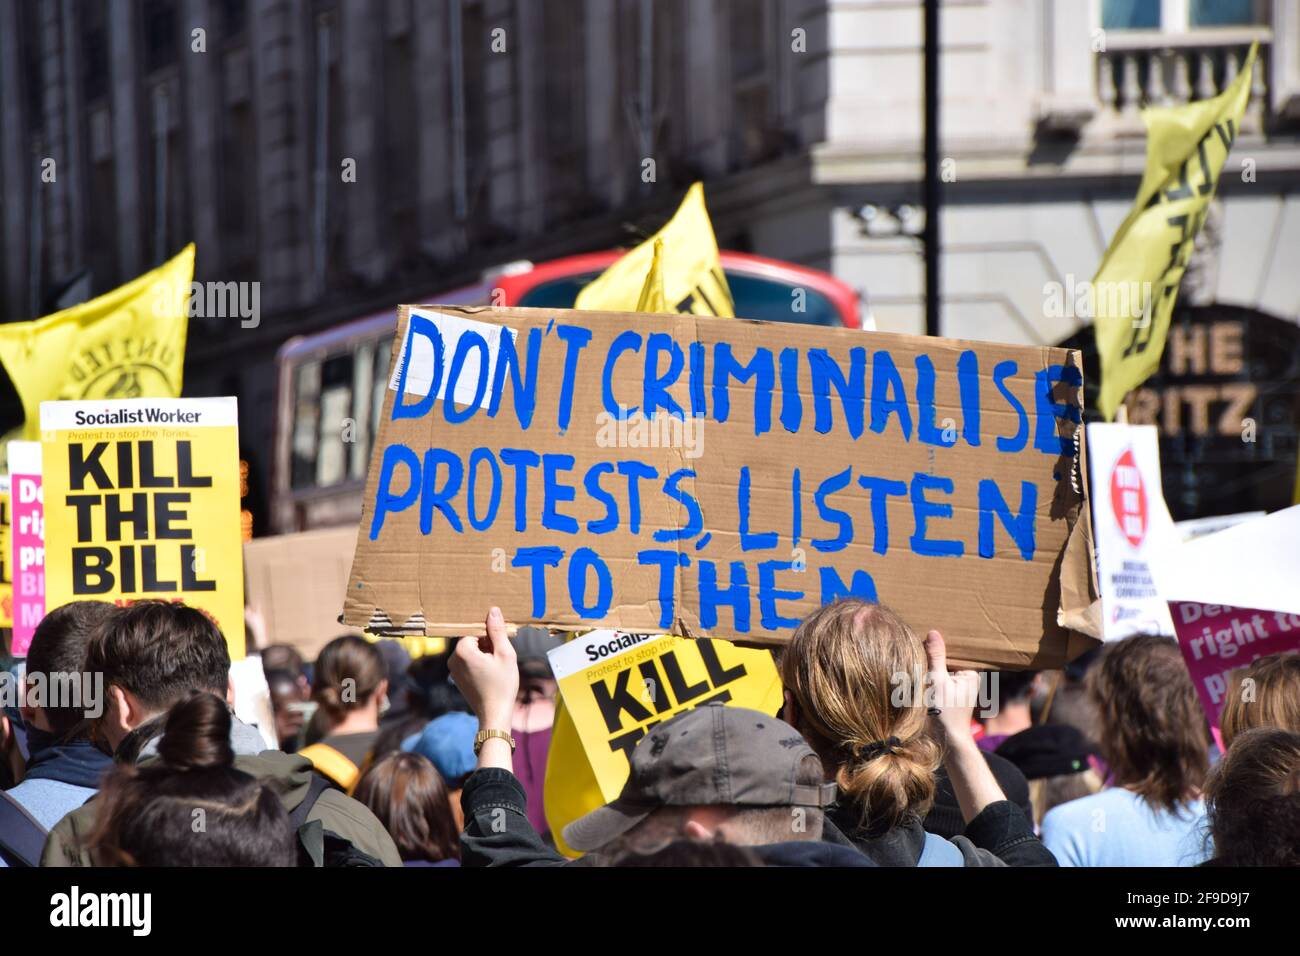 London, UK. 17th Apr, 2021. A protester holds a placard that says Don't Criminalise Protests, Listen To Them during the Kill The Bill protest in Central London.Crowds once again marched in protest against the Police, Crime, Sentencing and Courts Bill. (Photo by Vuk Valcic/SOPA Images/Sipa USA) Credit: Sipa USA/Alamy Live News Stock Photo